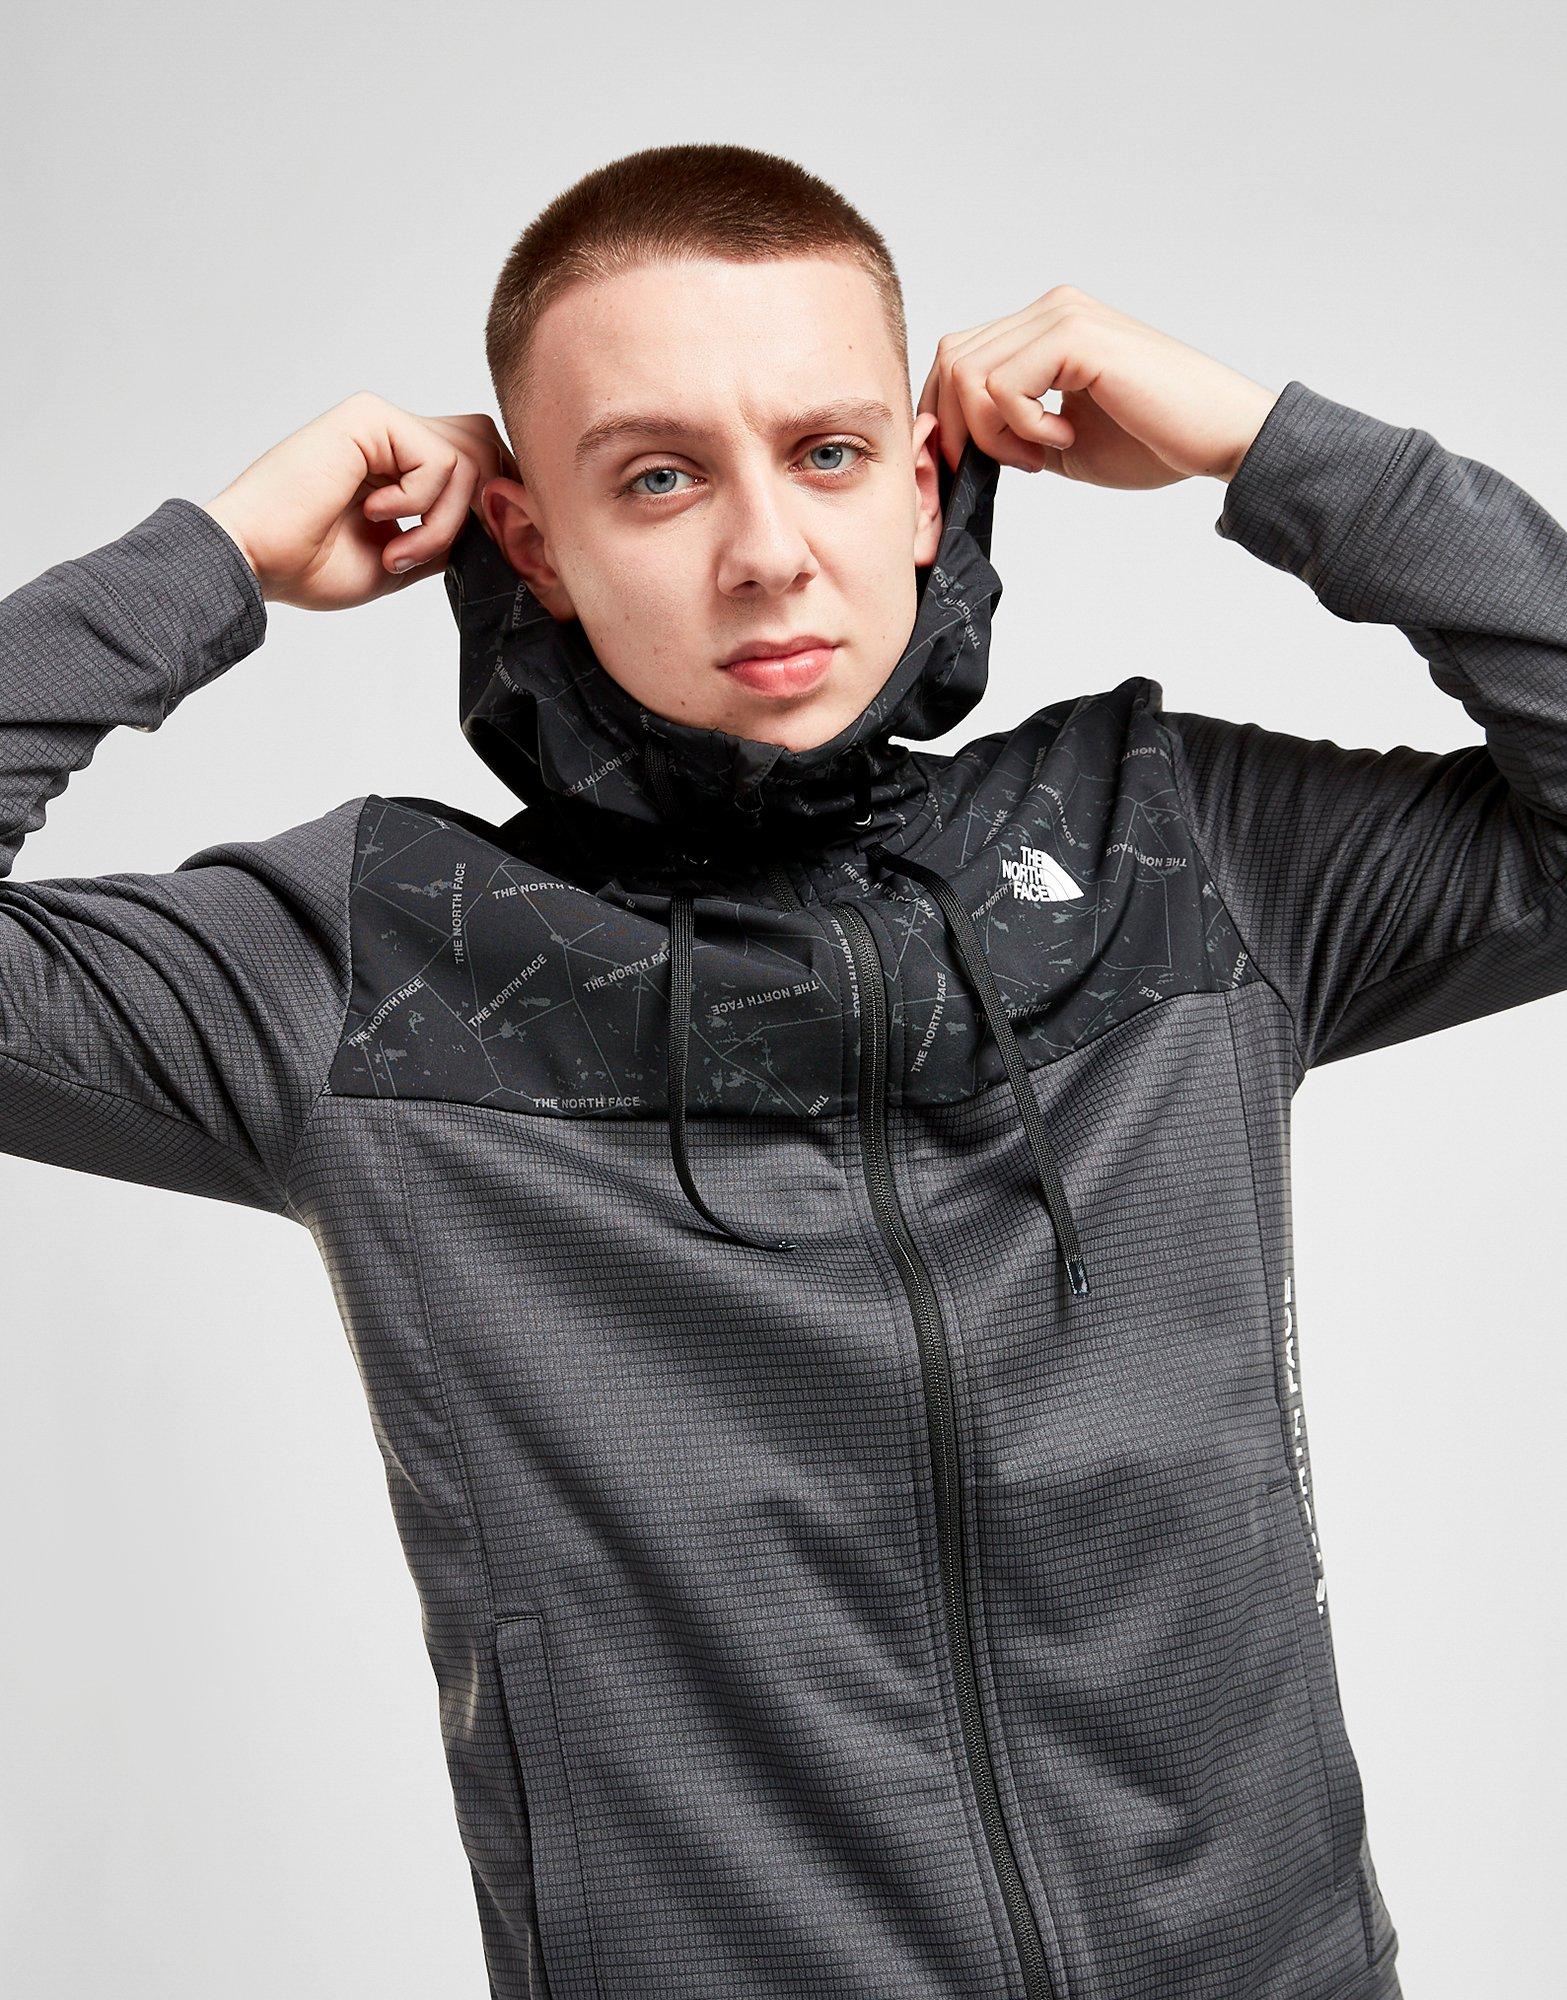 north face jacket with logo on arm